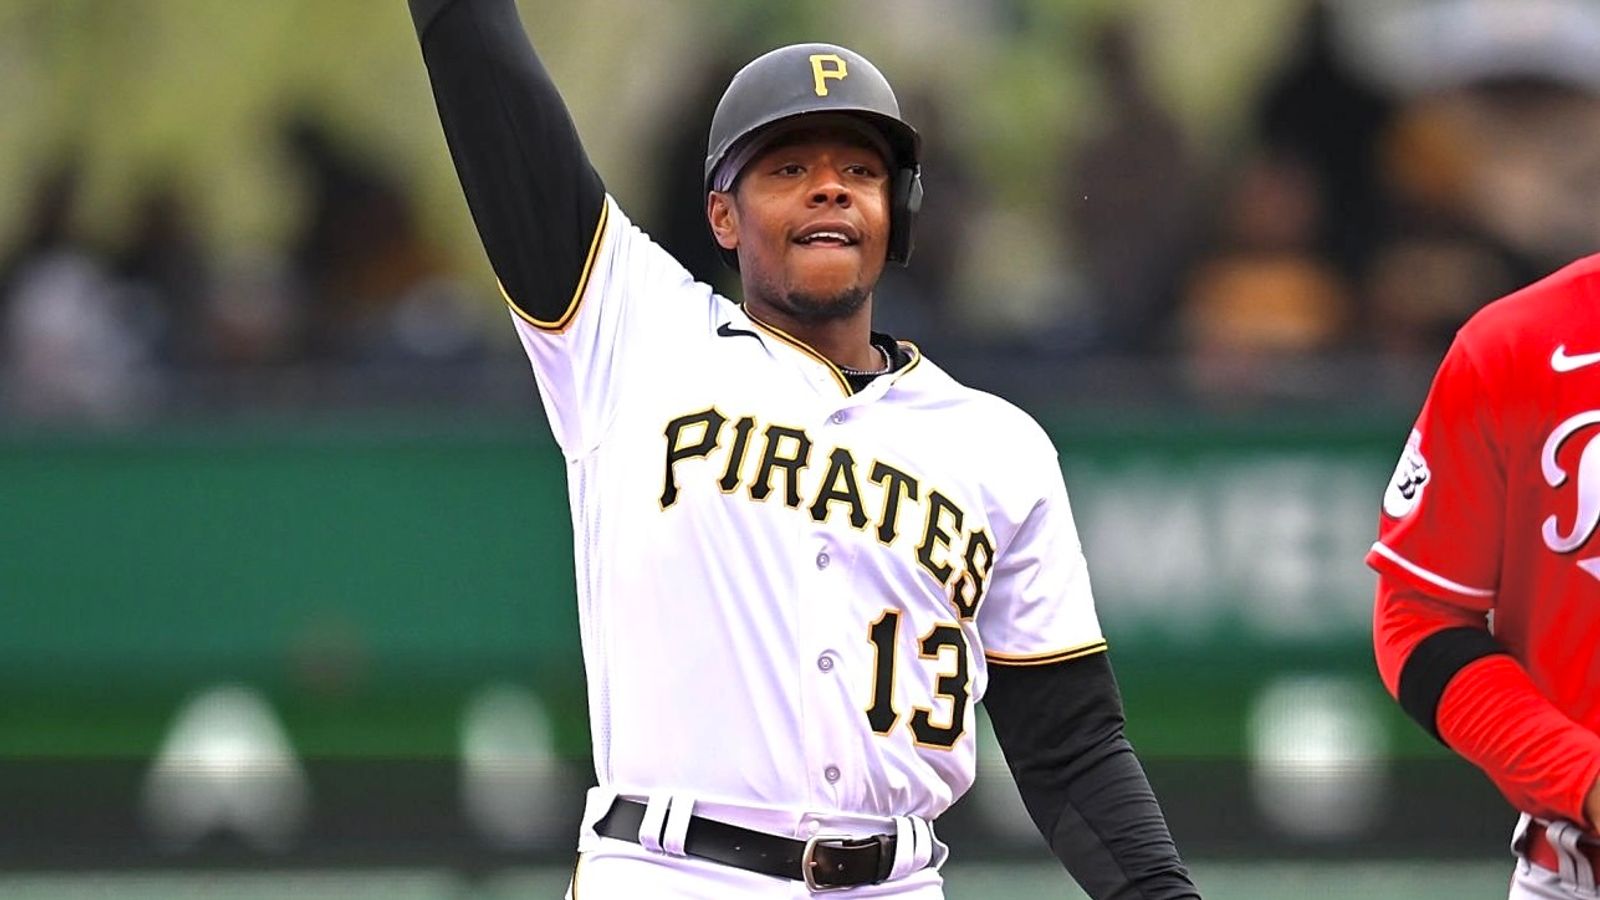 Pirates Freeze Frame: Ke'Bryan Hayes provides more impact from leadoff spot